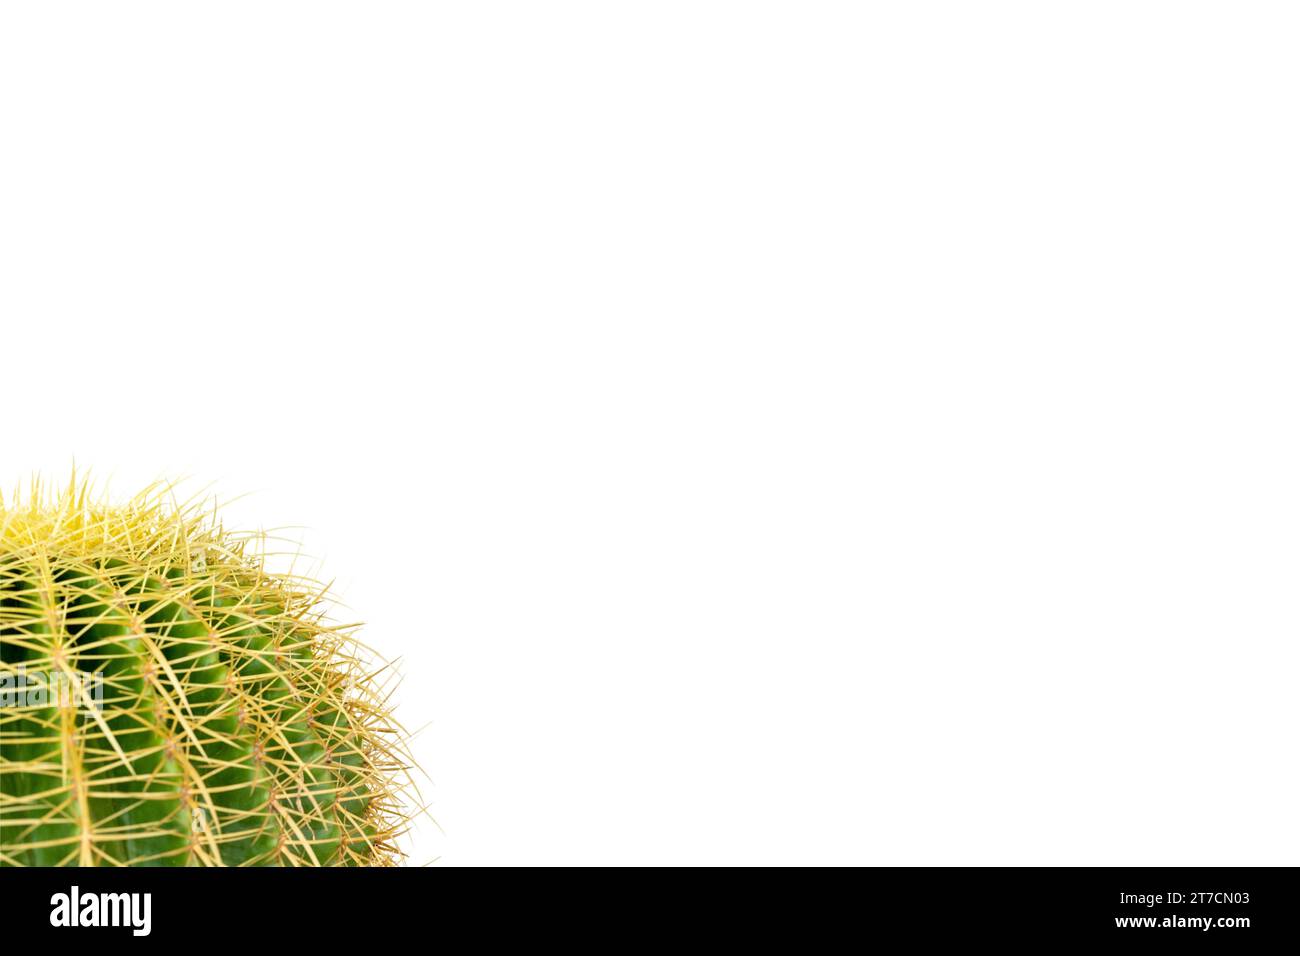 Golden ball cactus on white background with copy space for text Stock Photo